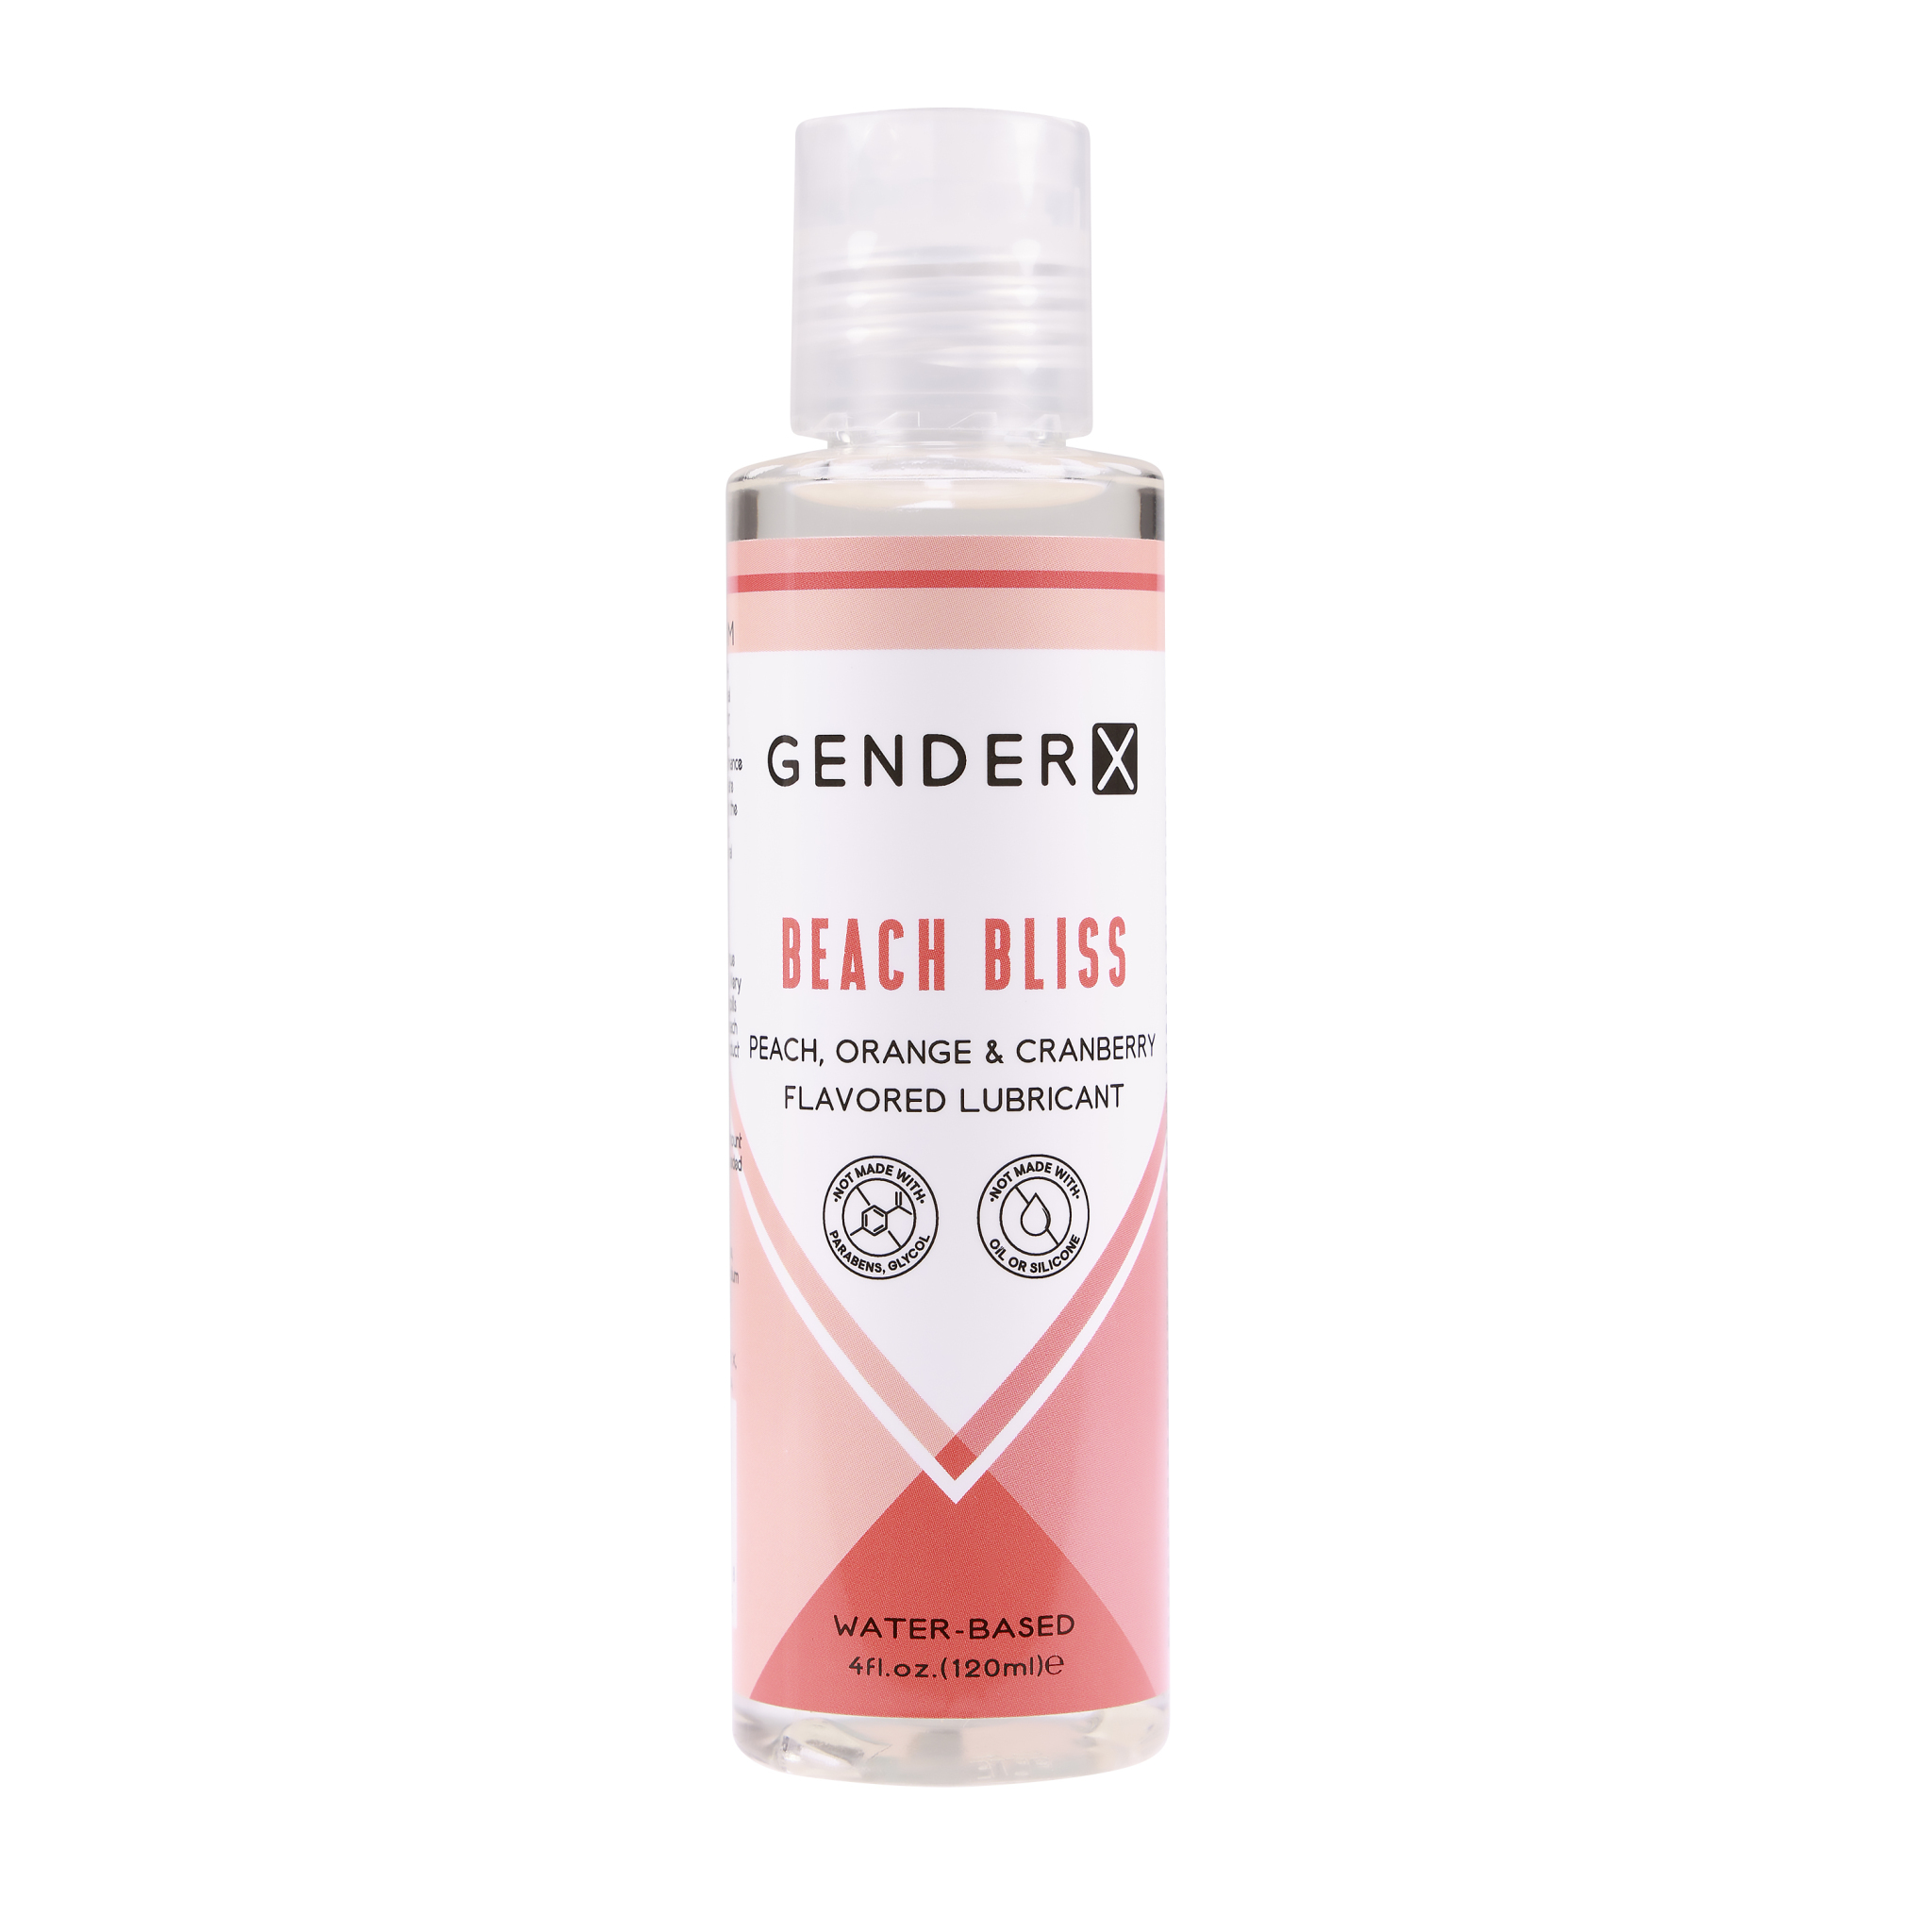 GENDER X BEACH BLISS FLAVORED LUBE 4 OZ - Click Image to Close